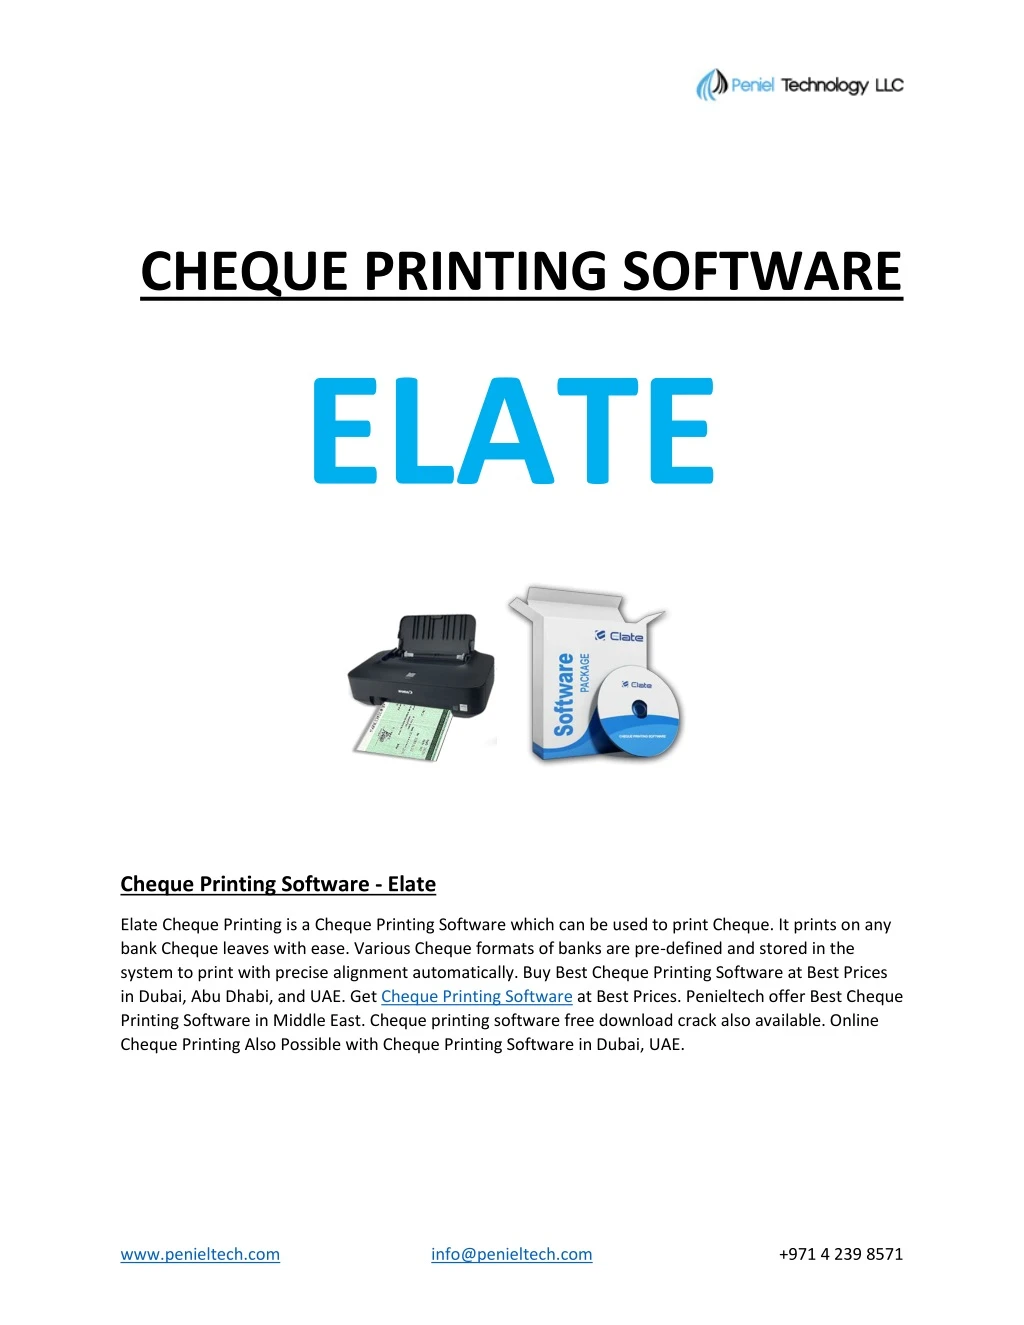 cheque printing software elate